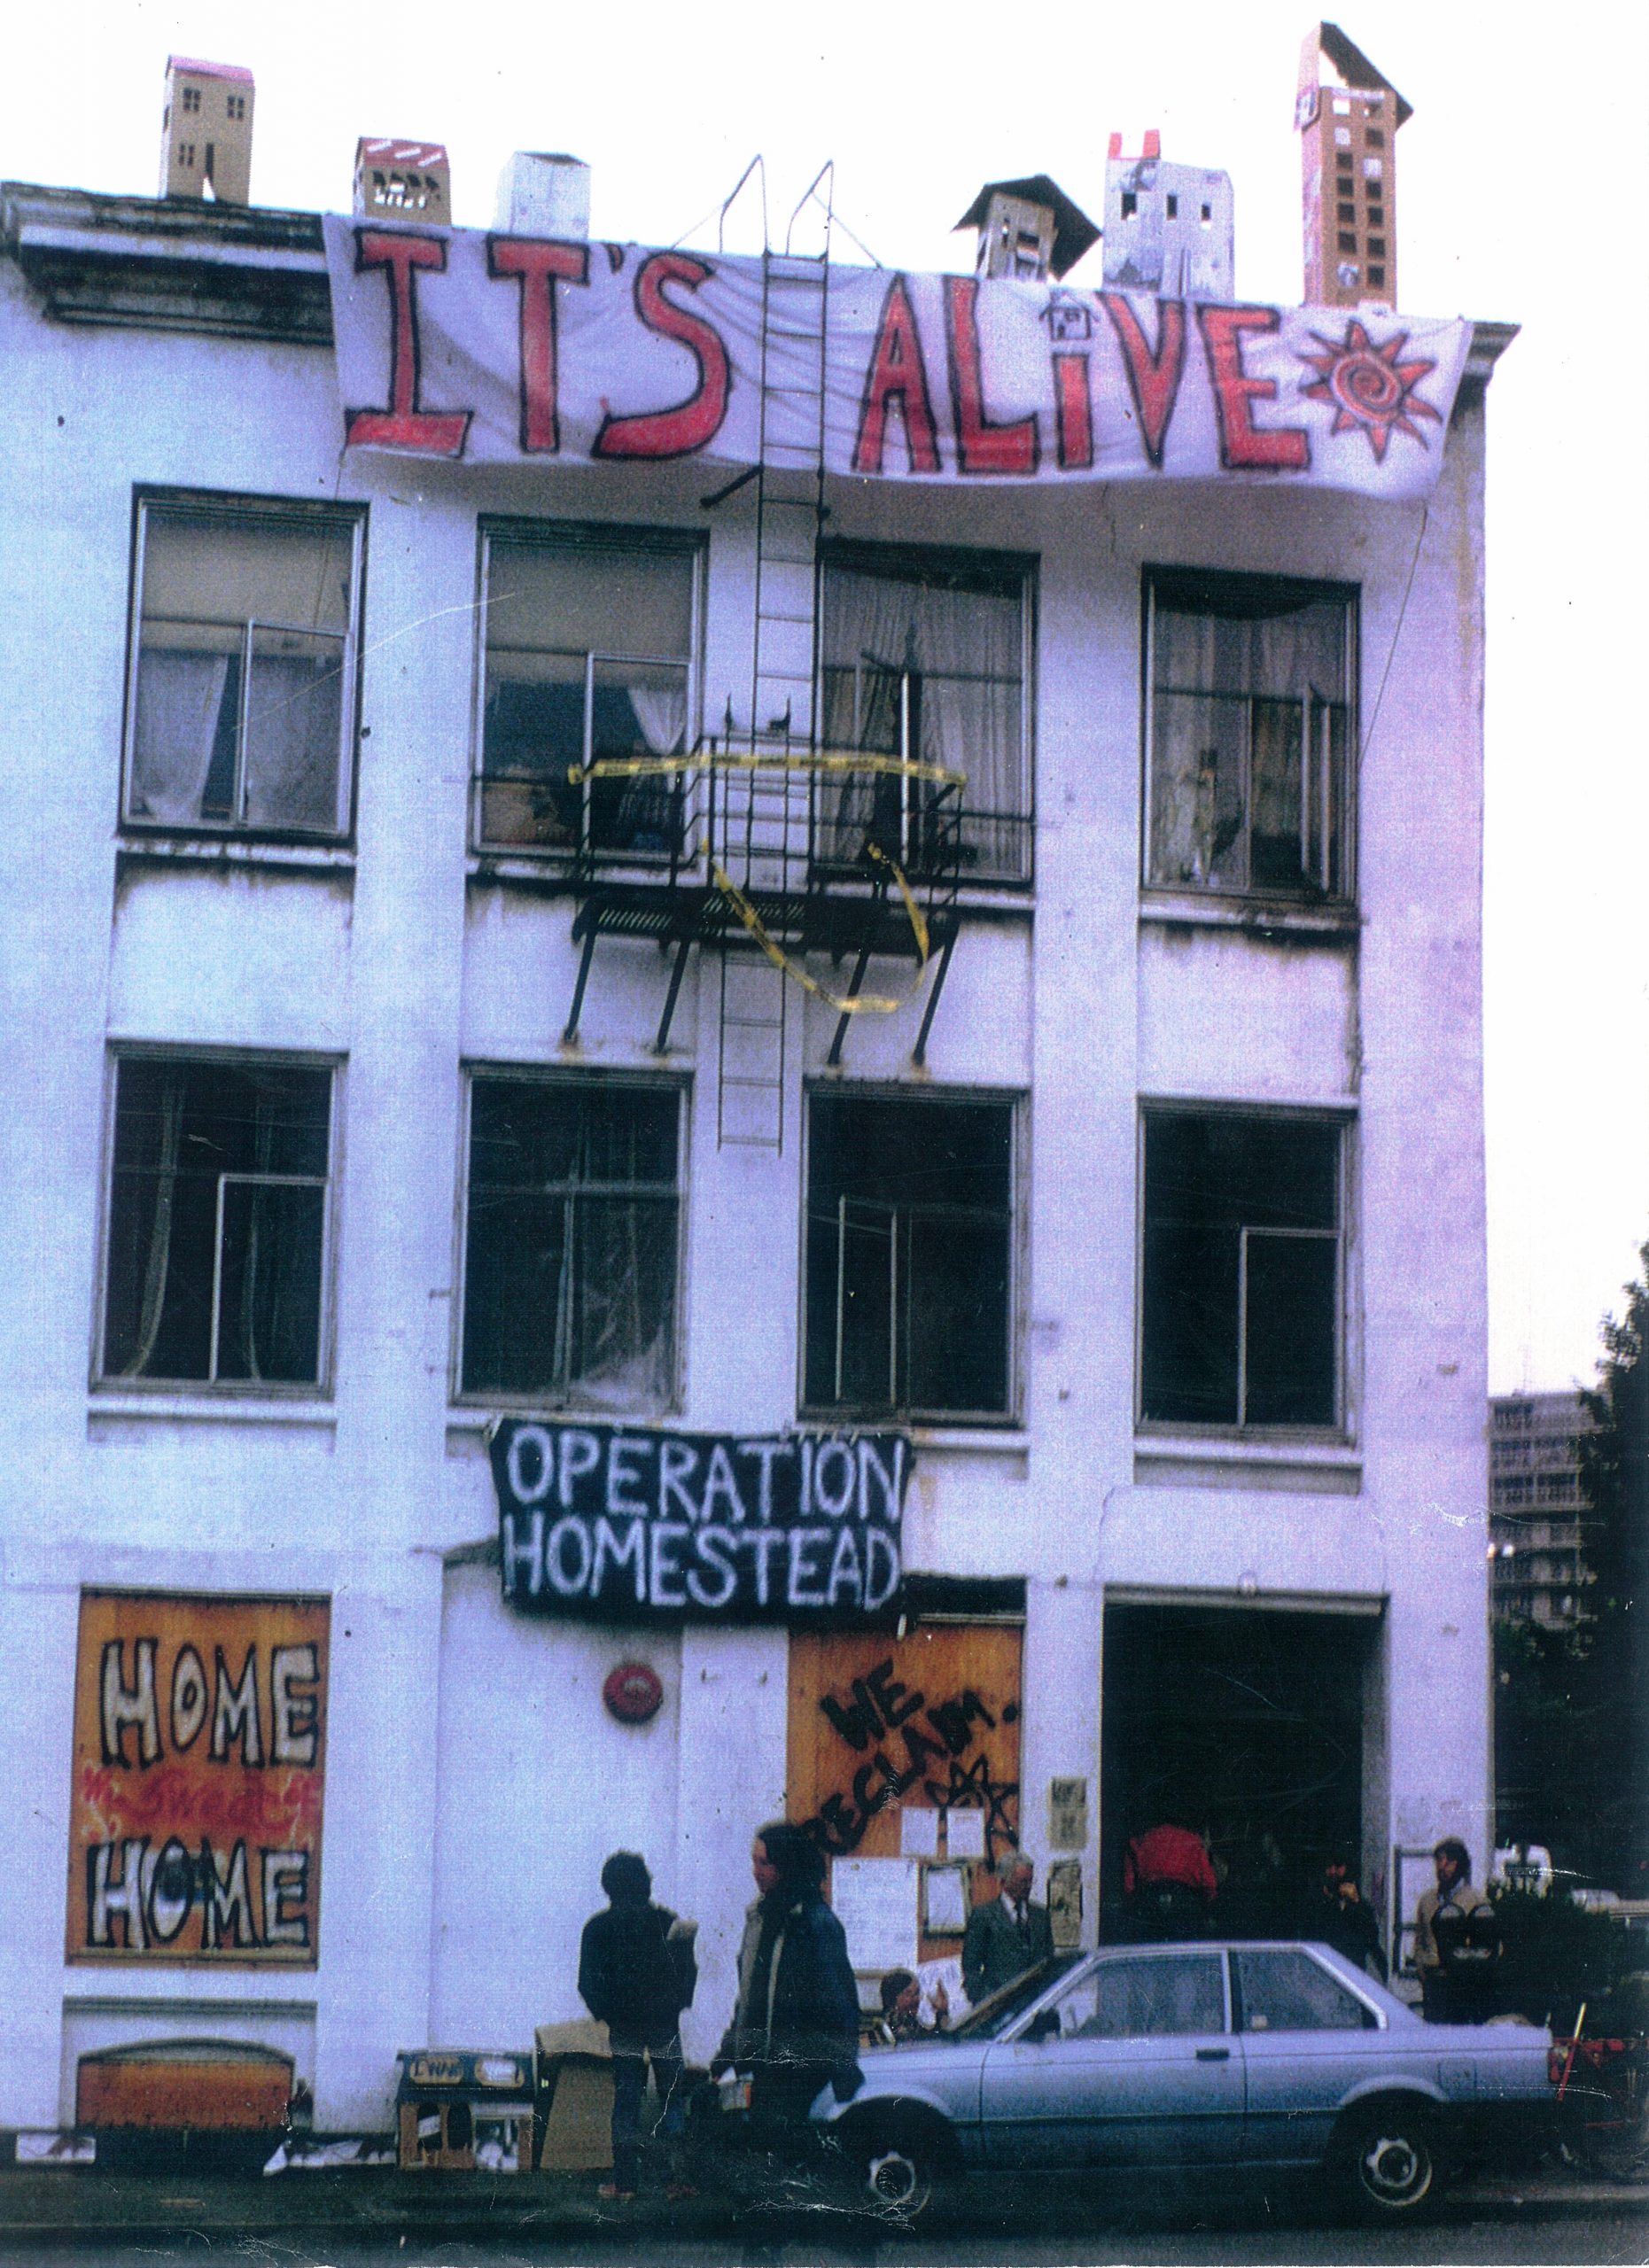 Squatters occupy the Arion building in Seattle after it sat vacant for months. There are signs that read "Operation Homestead" and "It's Alive" outside the large white building.